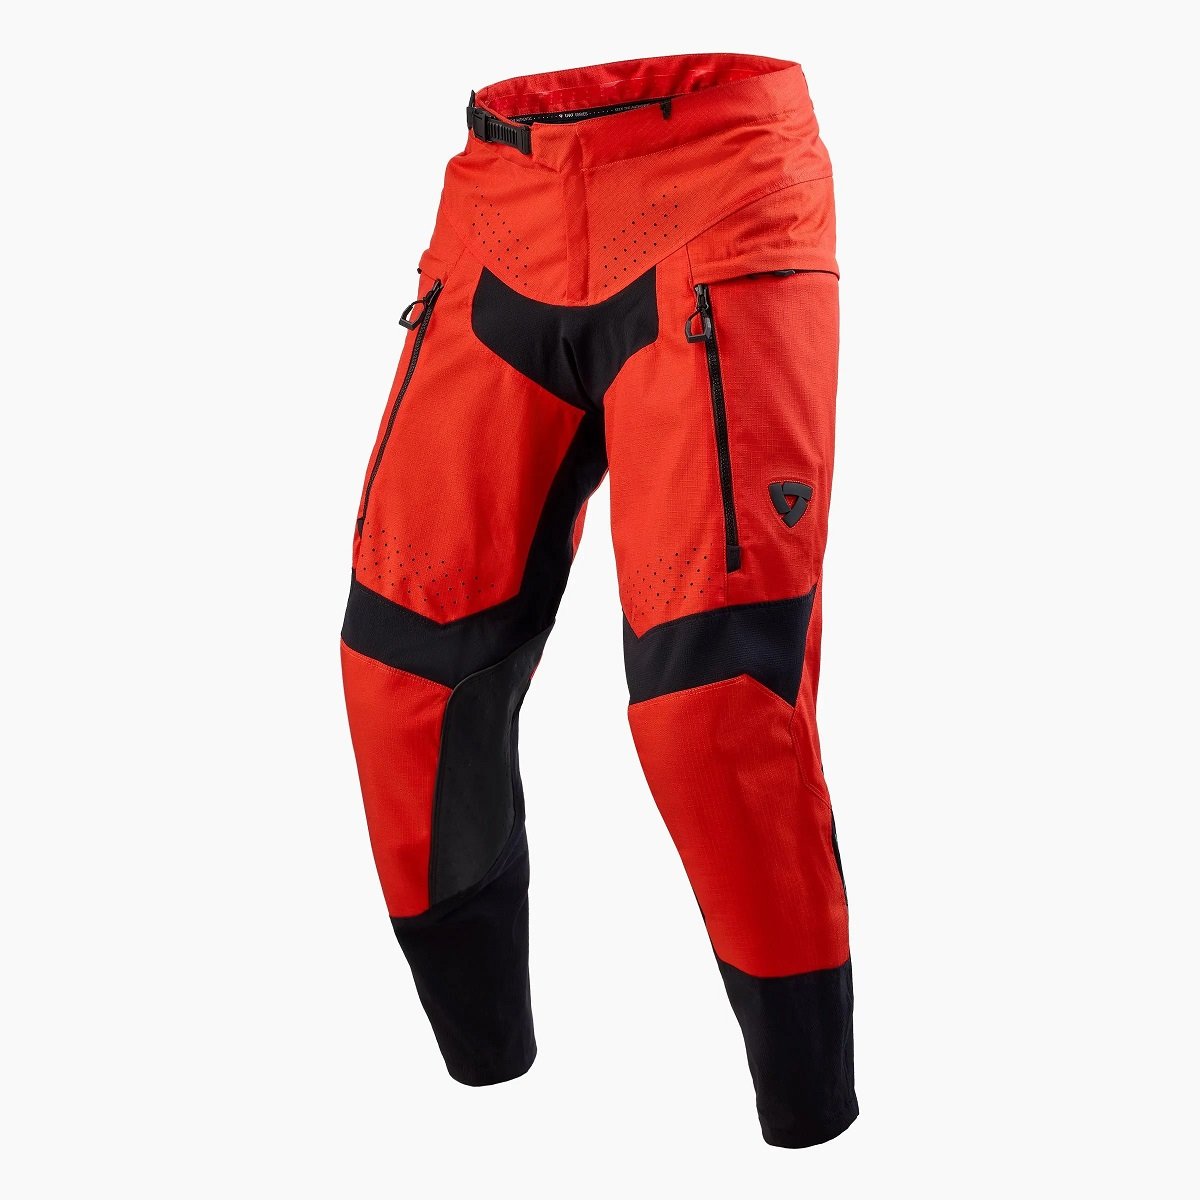 Image of REV'IT! Peninsula Trousers Red Motorcycle Pants Size XL ID 8700001349017